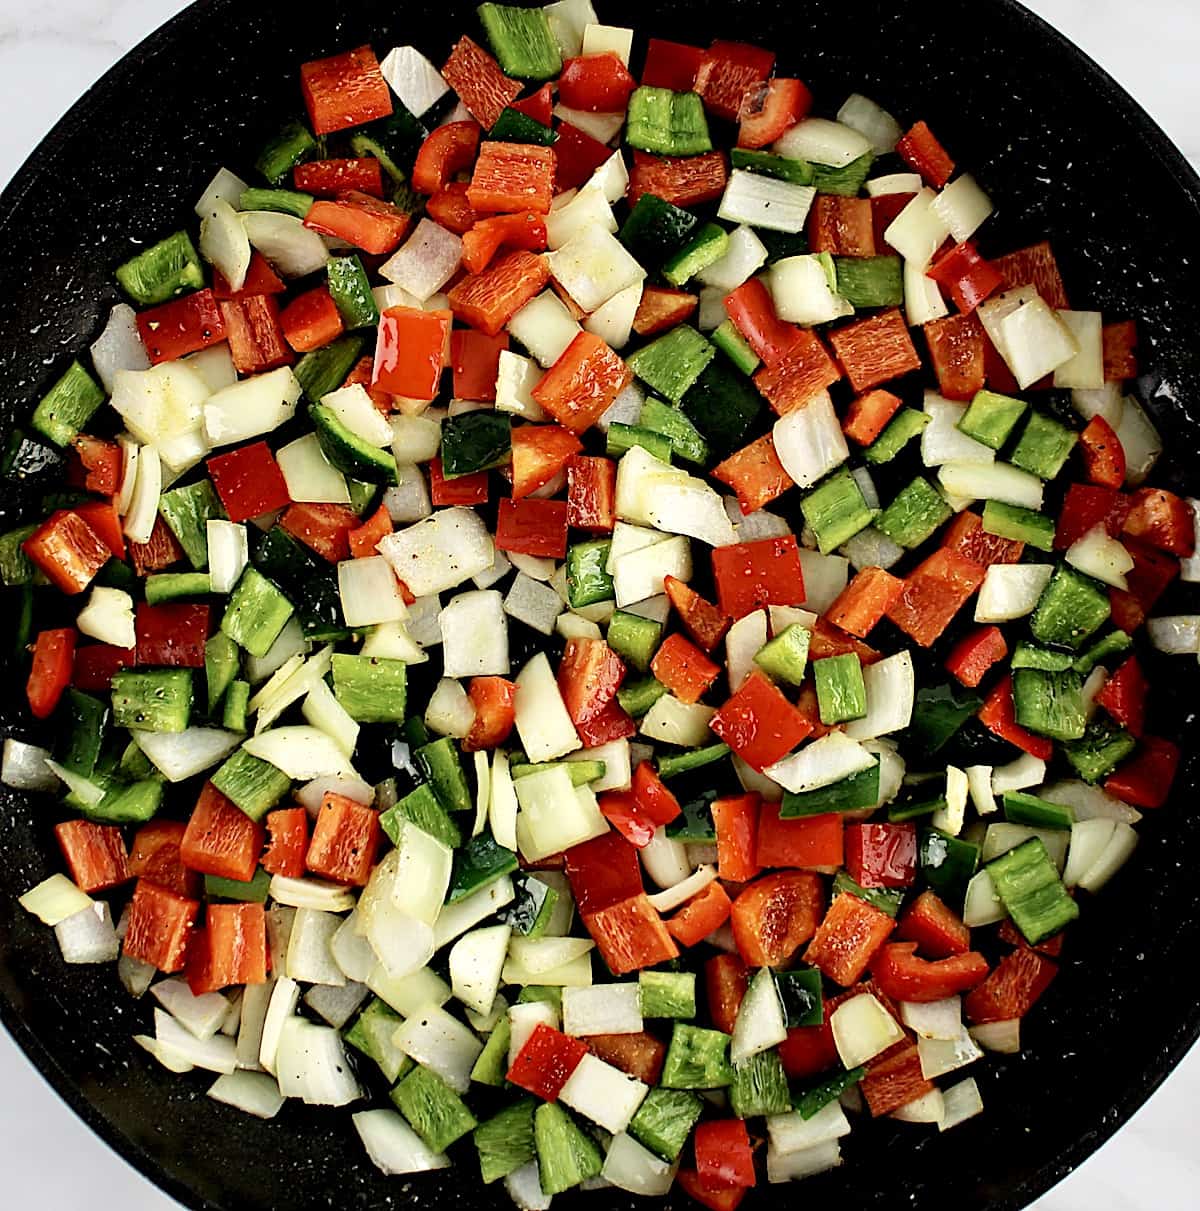 diced red and green peppers with onions